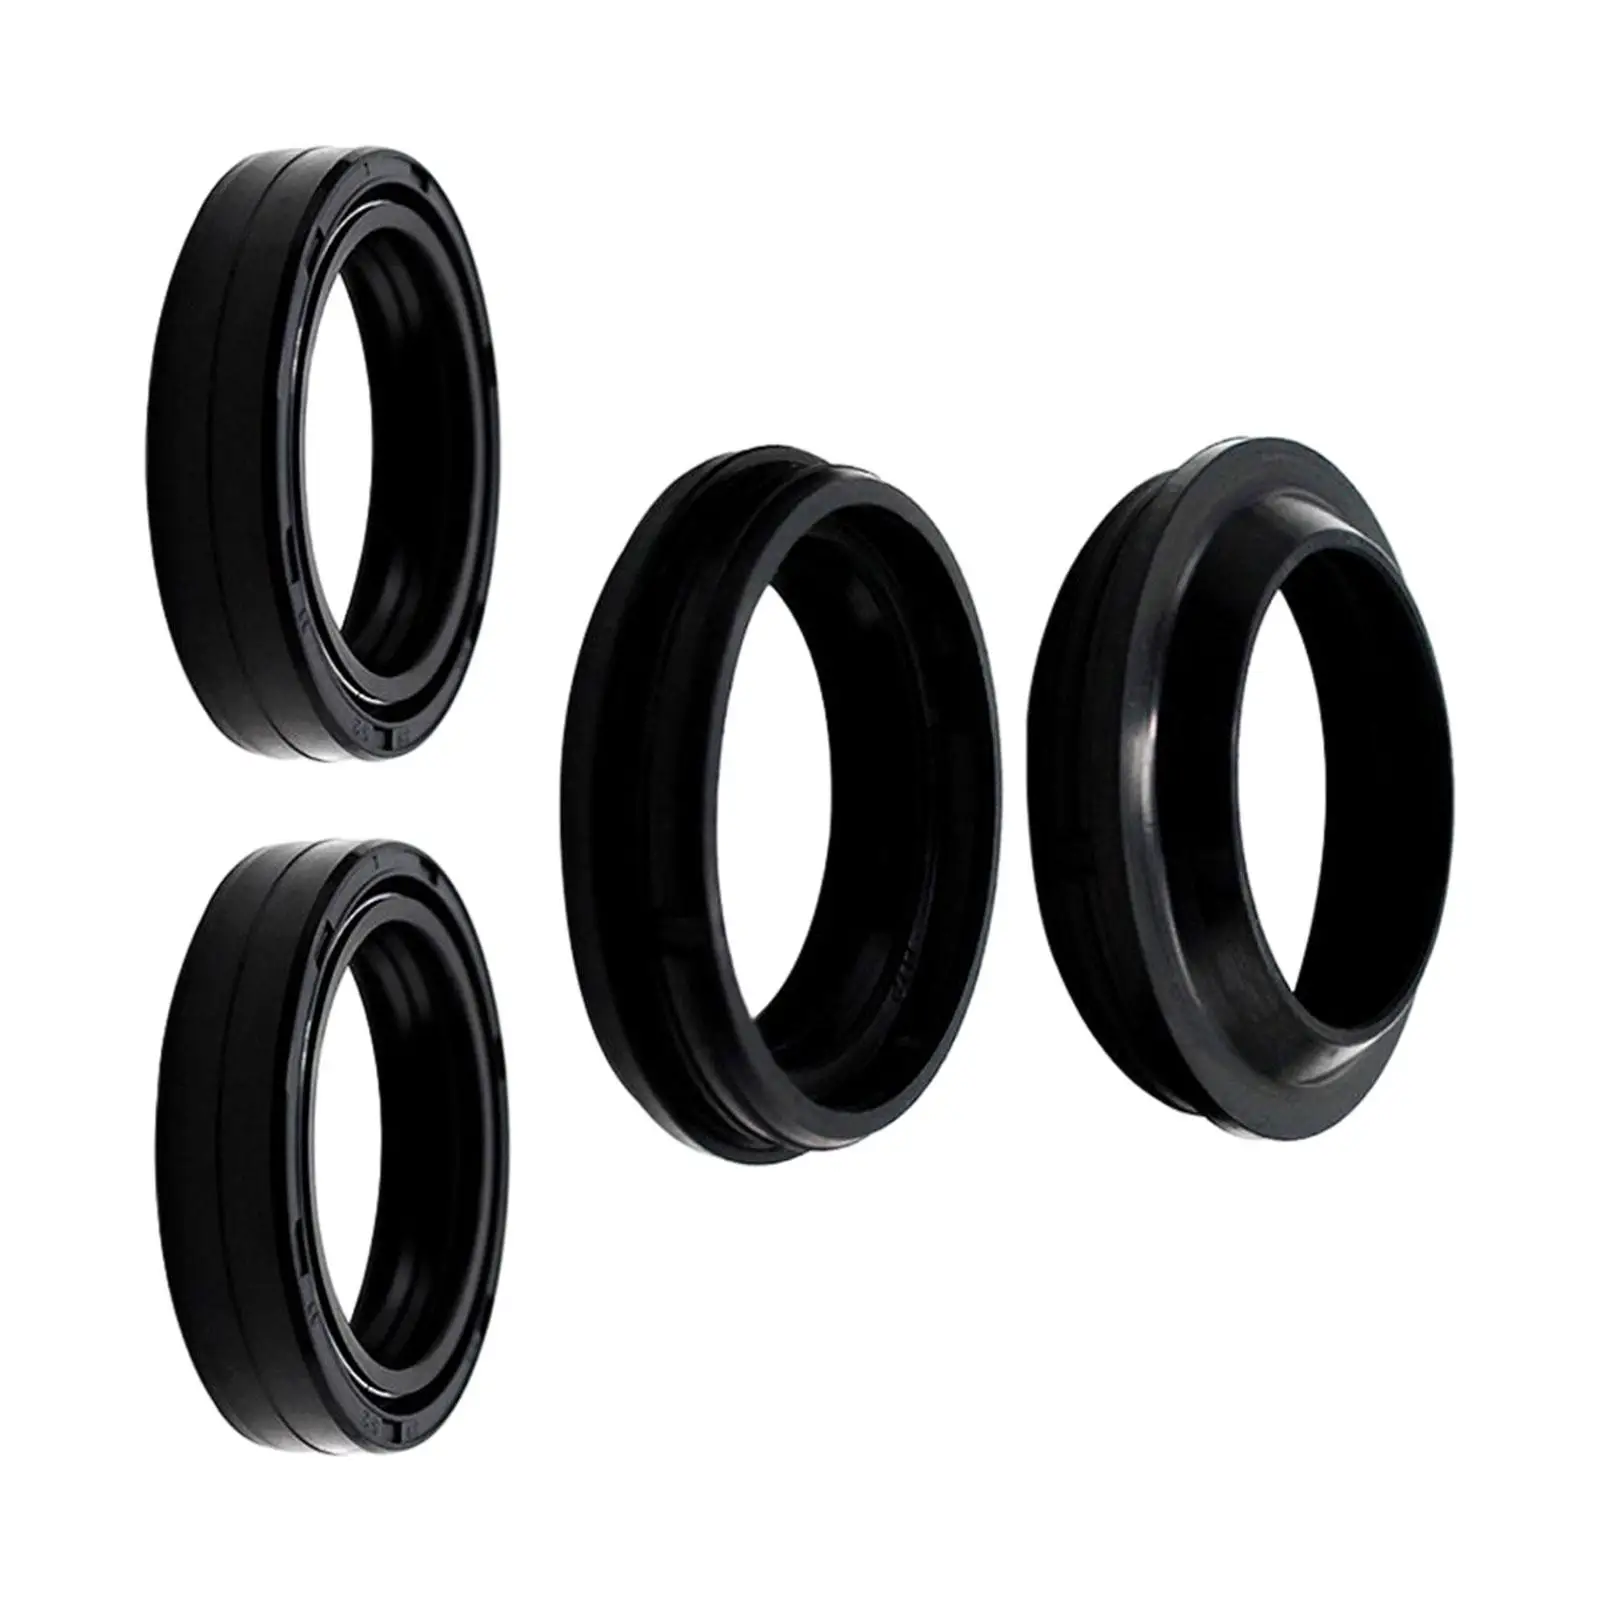 Front Fork Shock Oil Seal and Dust Seal Set Motorcycle Accessories 46x58x11mm